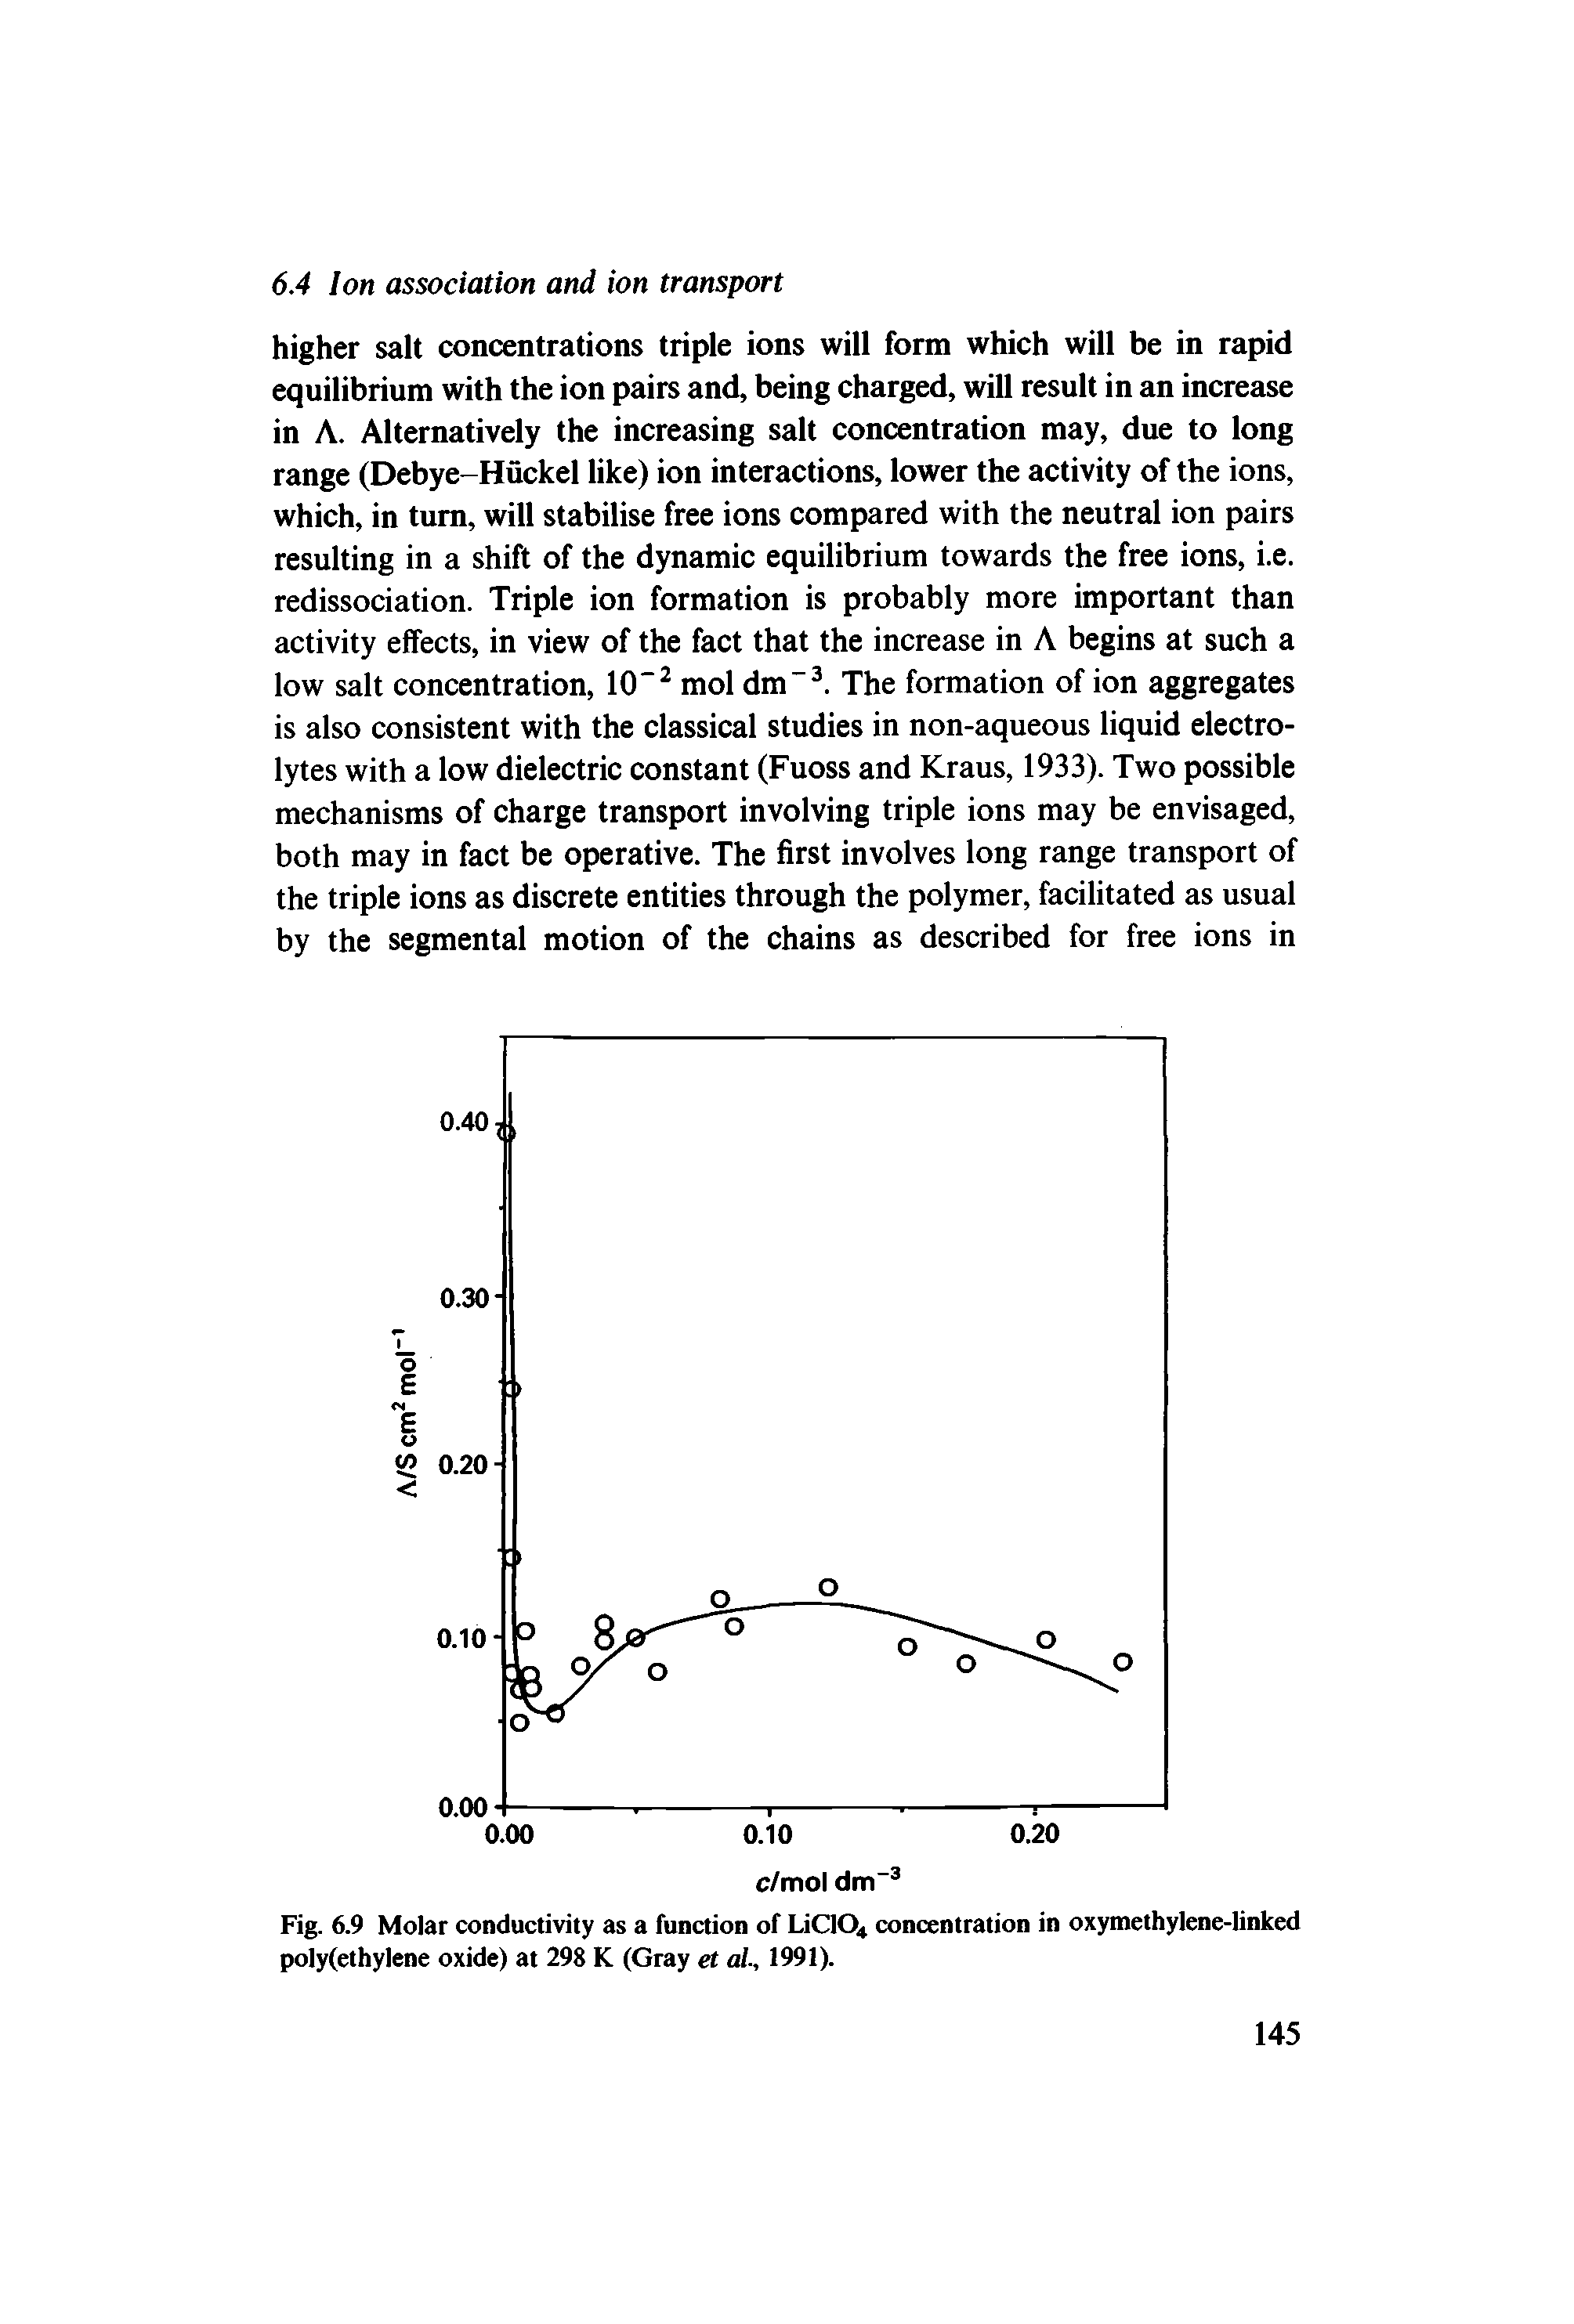 Fig. 6.9 Molar conductivity as a function of LiClOit concentration in oxymethylene-linked polyfethylene oxide) at 298 K (Gray et ai, 1991).